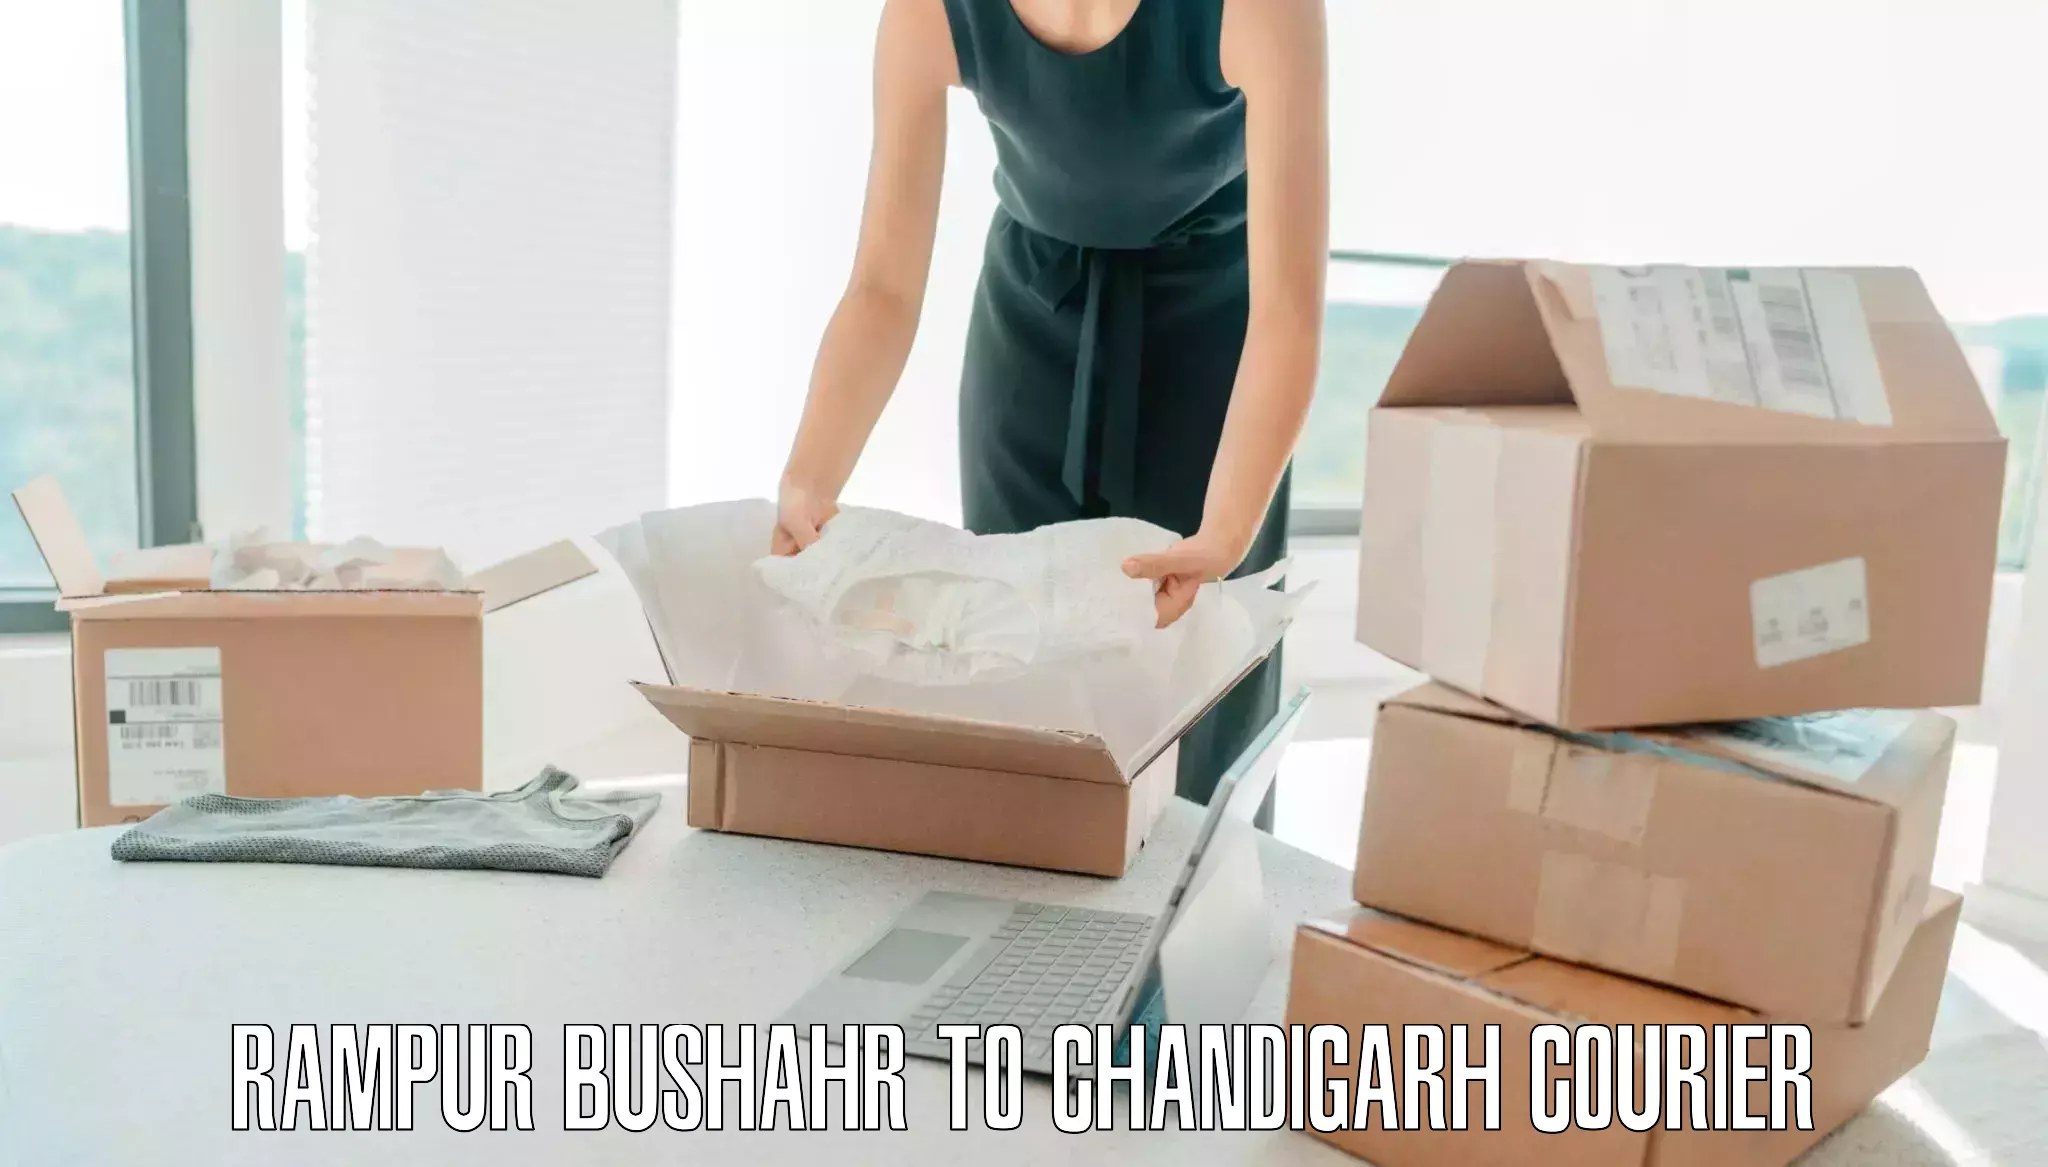 Luggage transport consulting Rampur Bushahr to Chandigarh